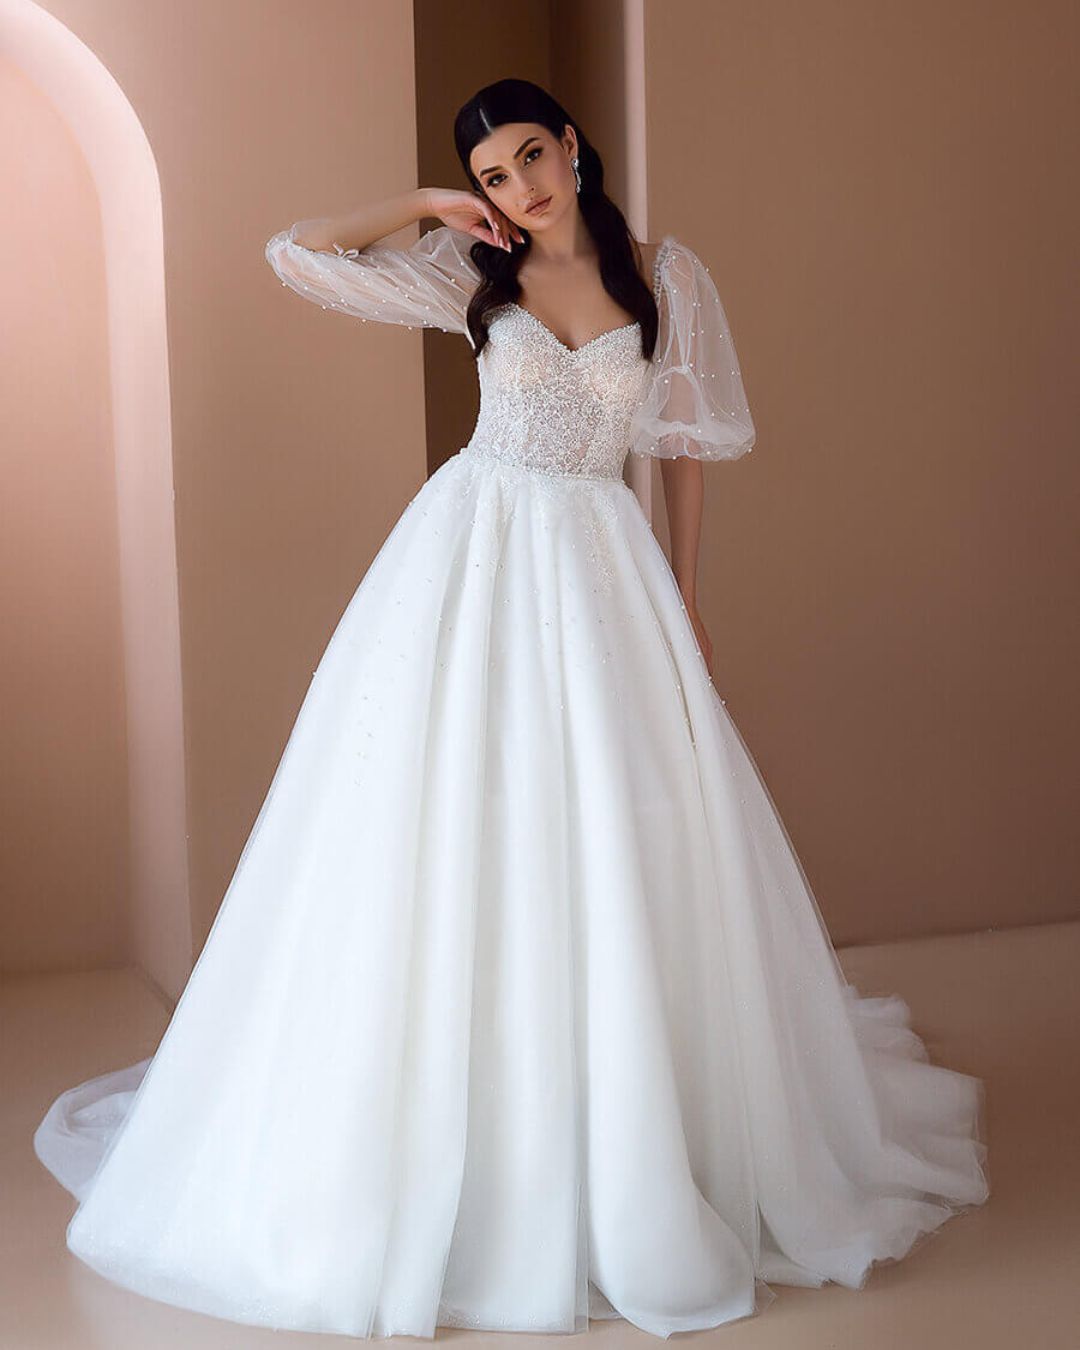 Why You Should Consider a Sleeved Wedding Dress 